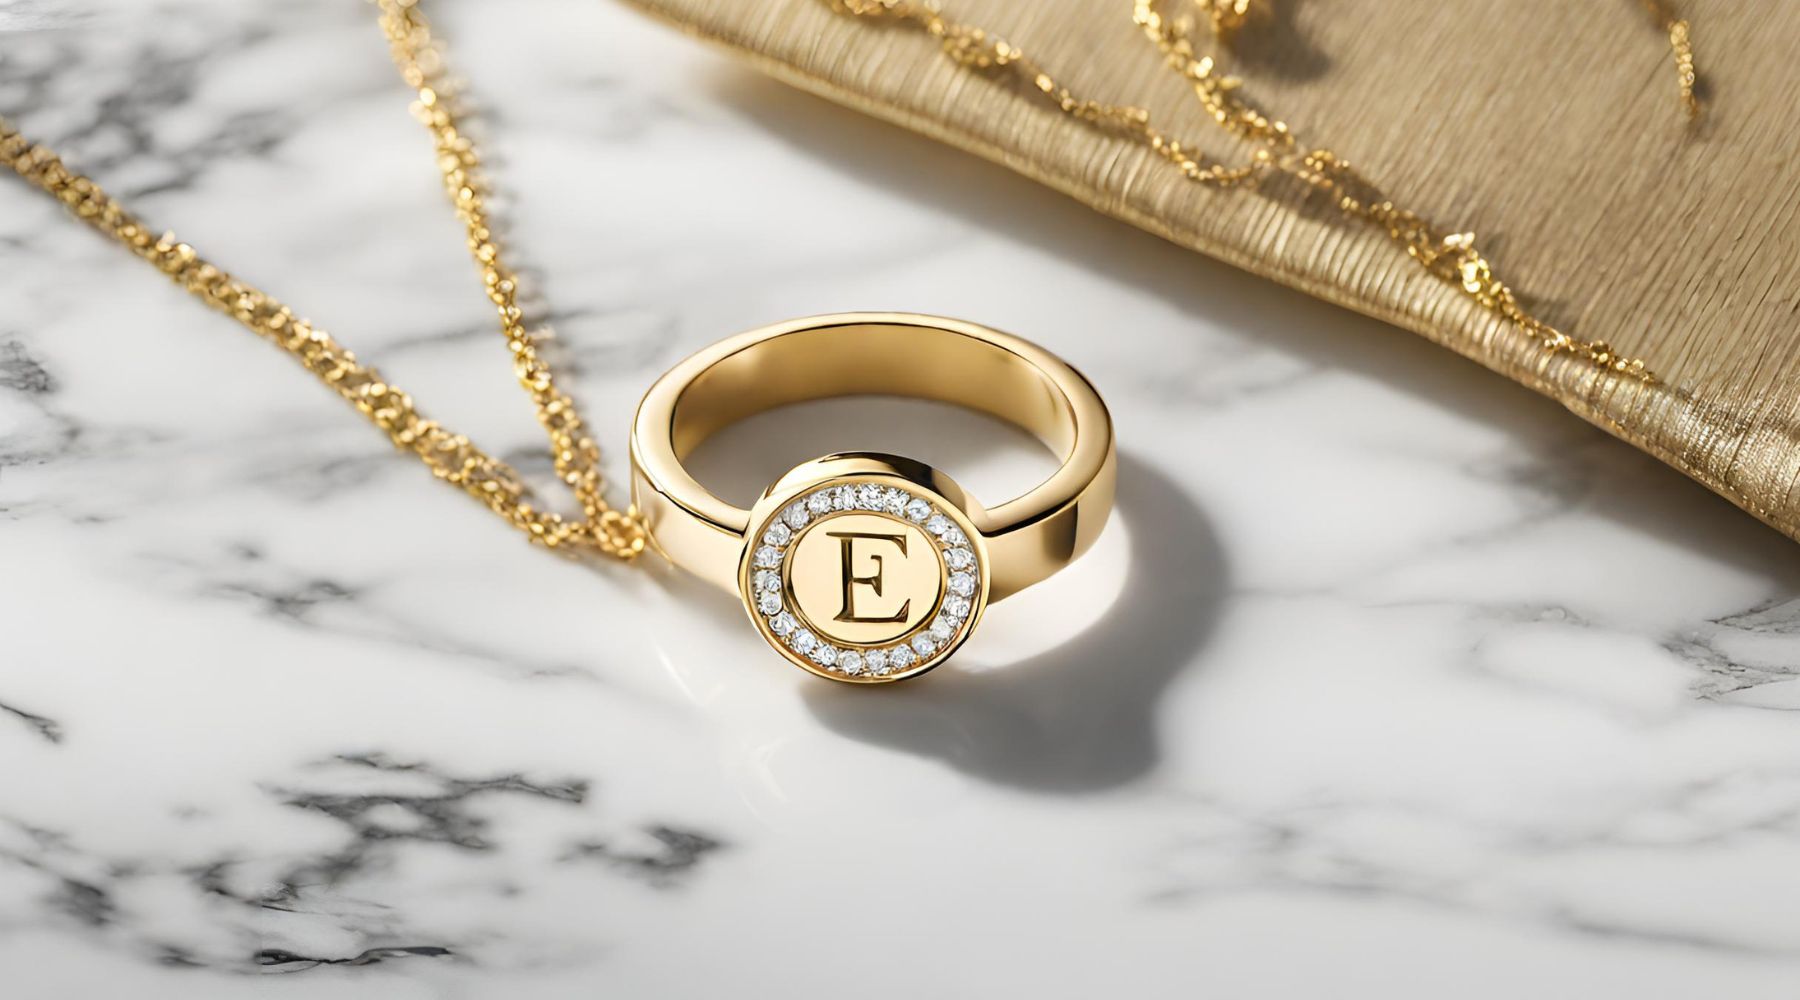 personalized necklace with ring with "E"